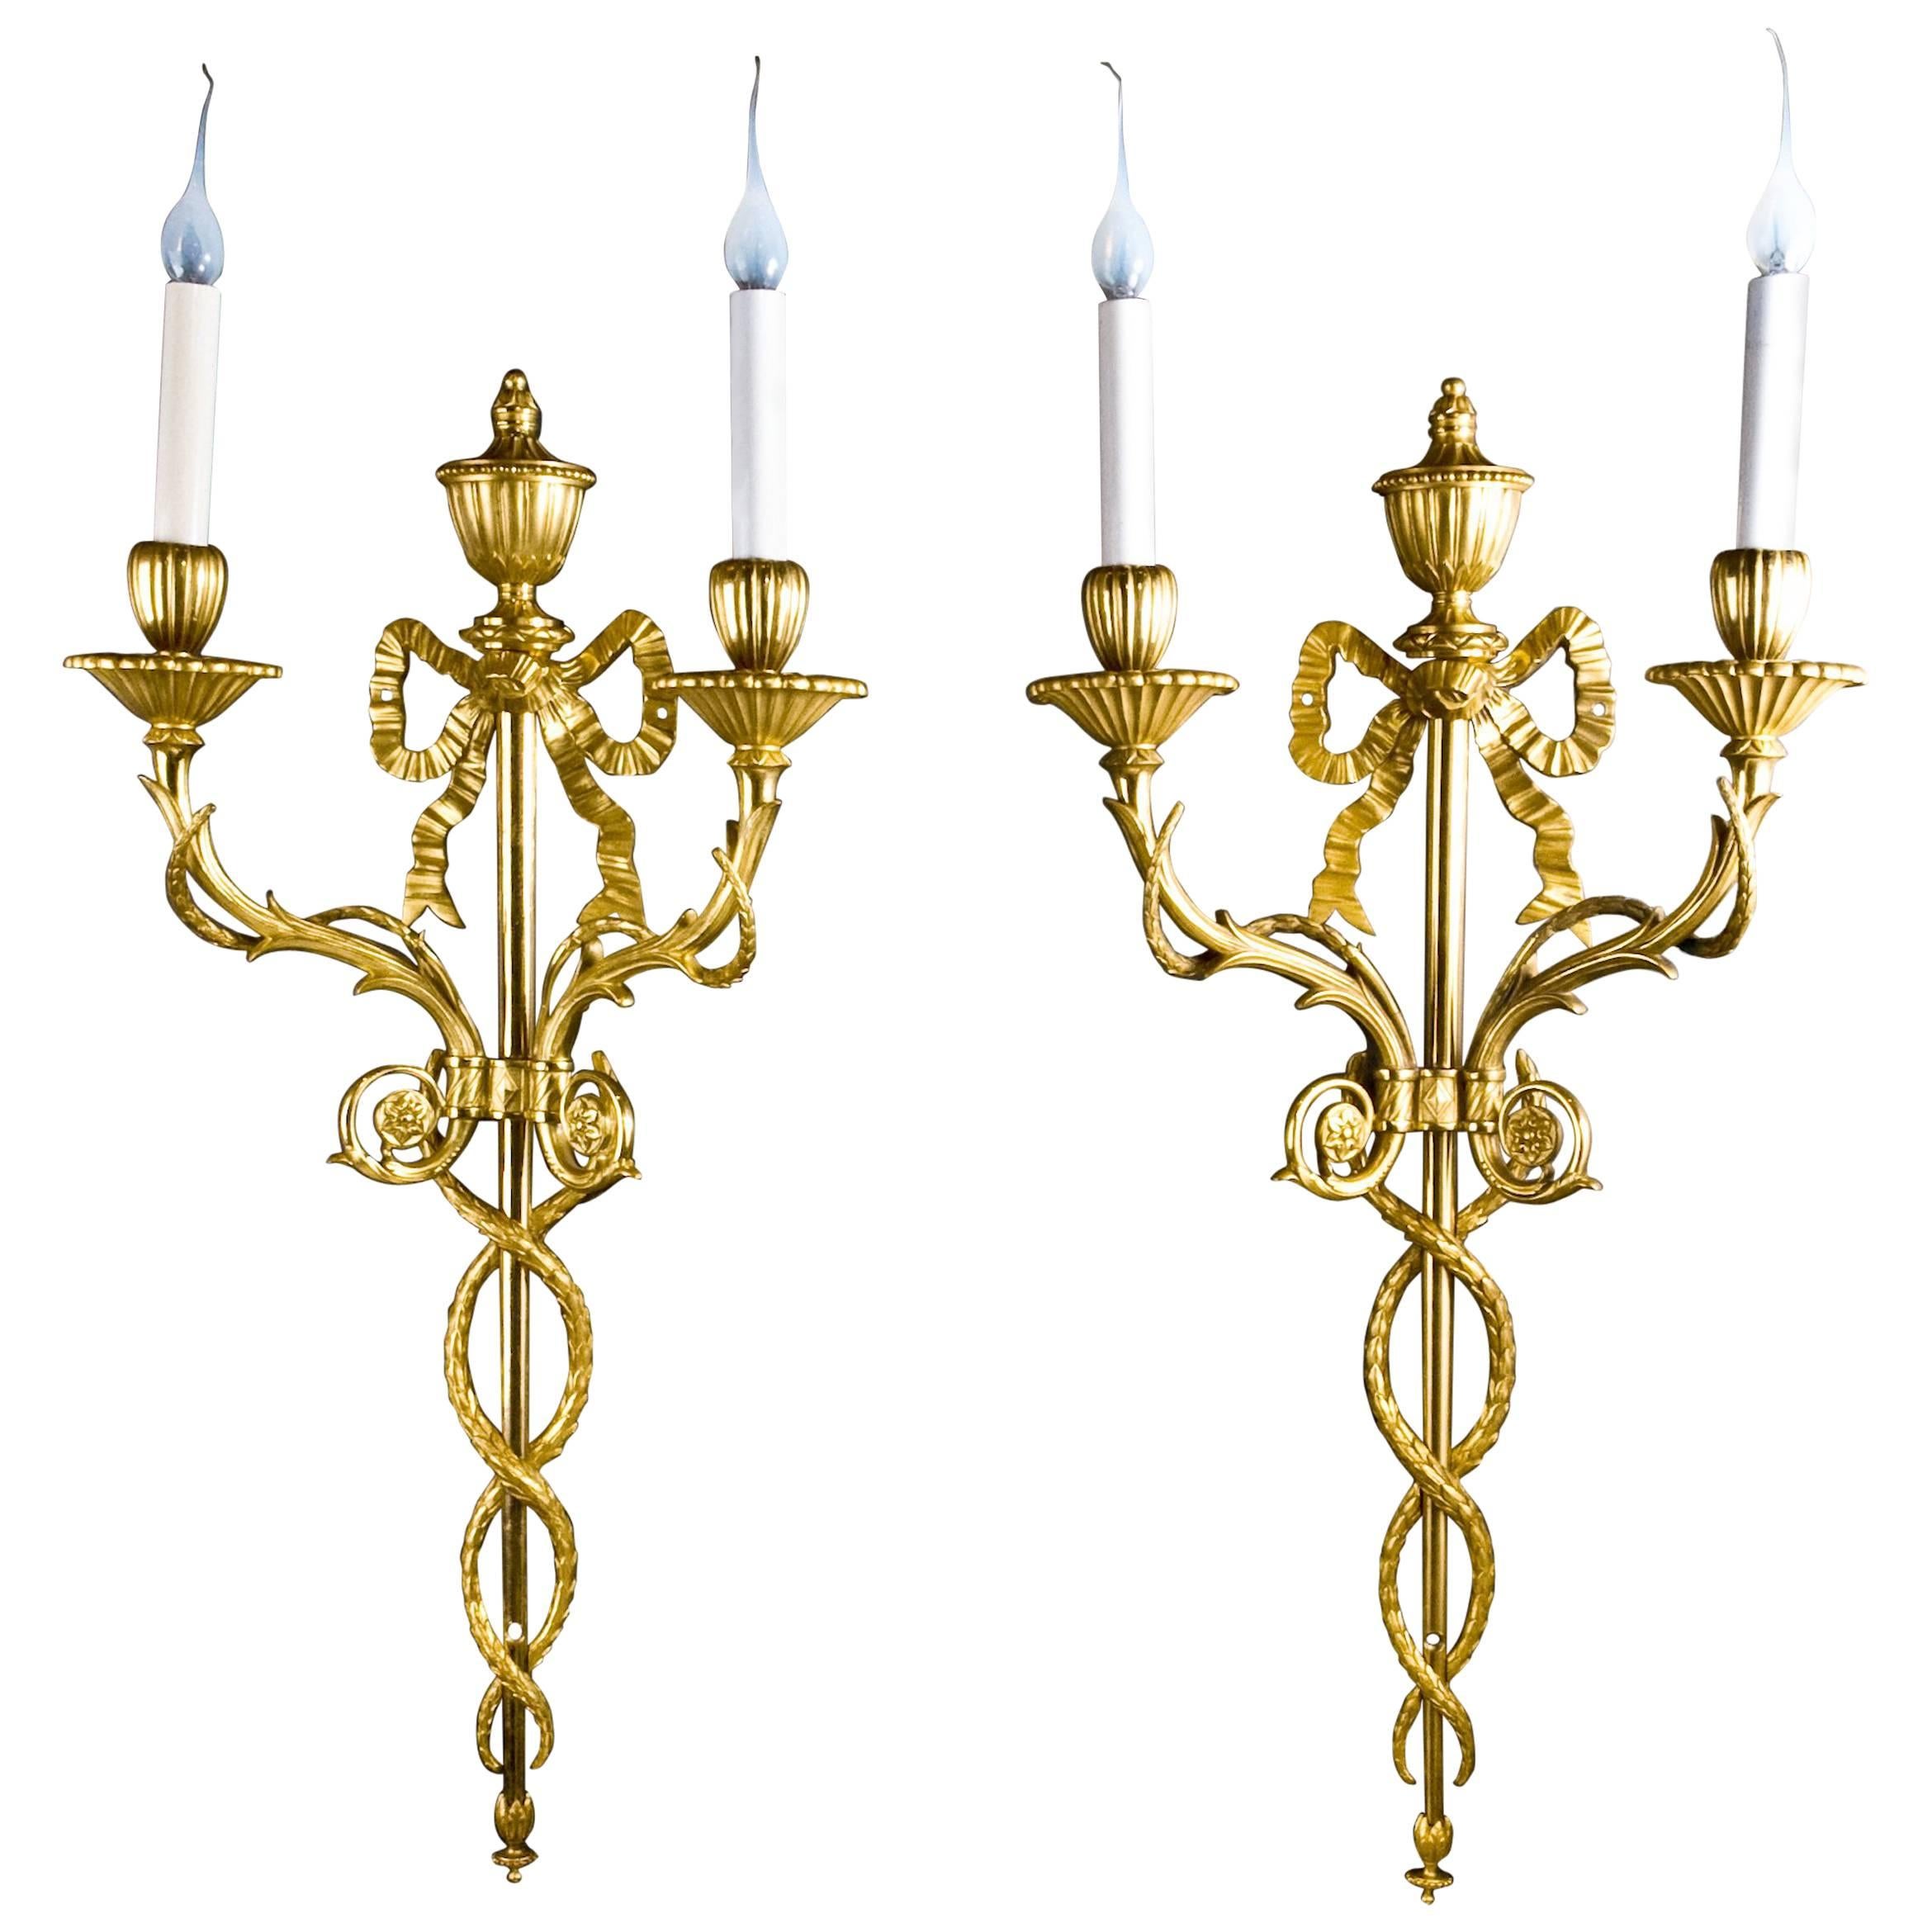 Pair of Superb Antique French Louis XVI Style Gilt Bronze Two-Light Wall Sconces